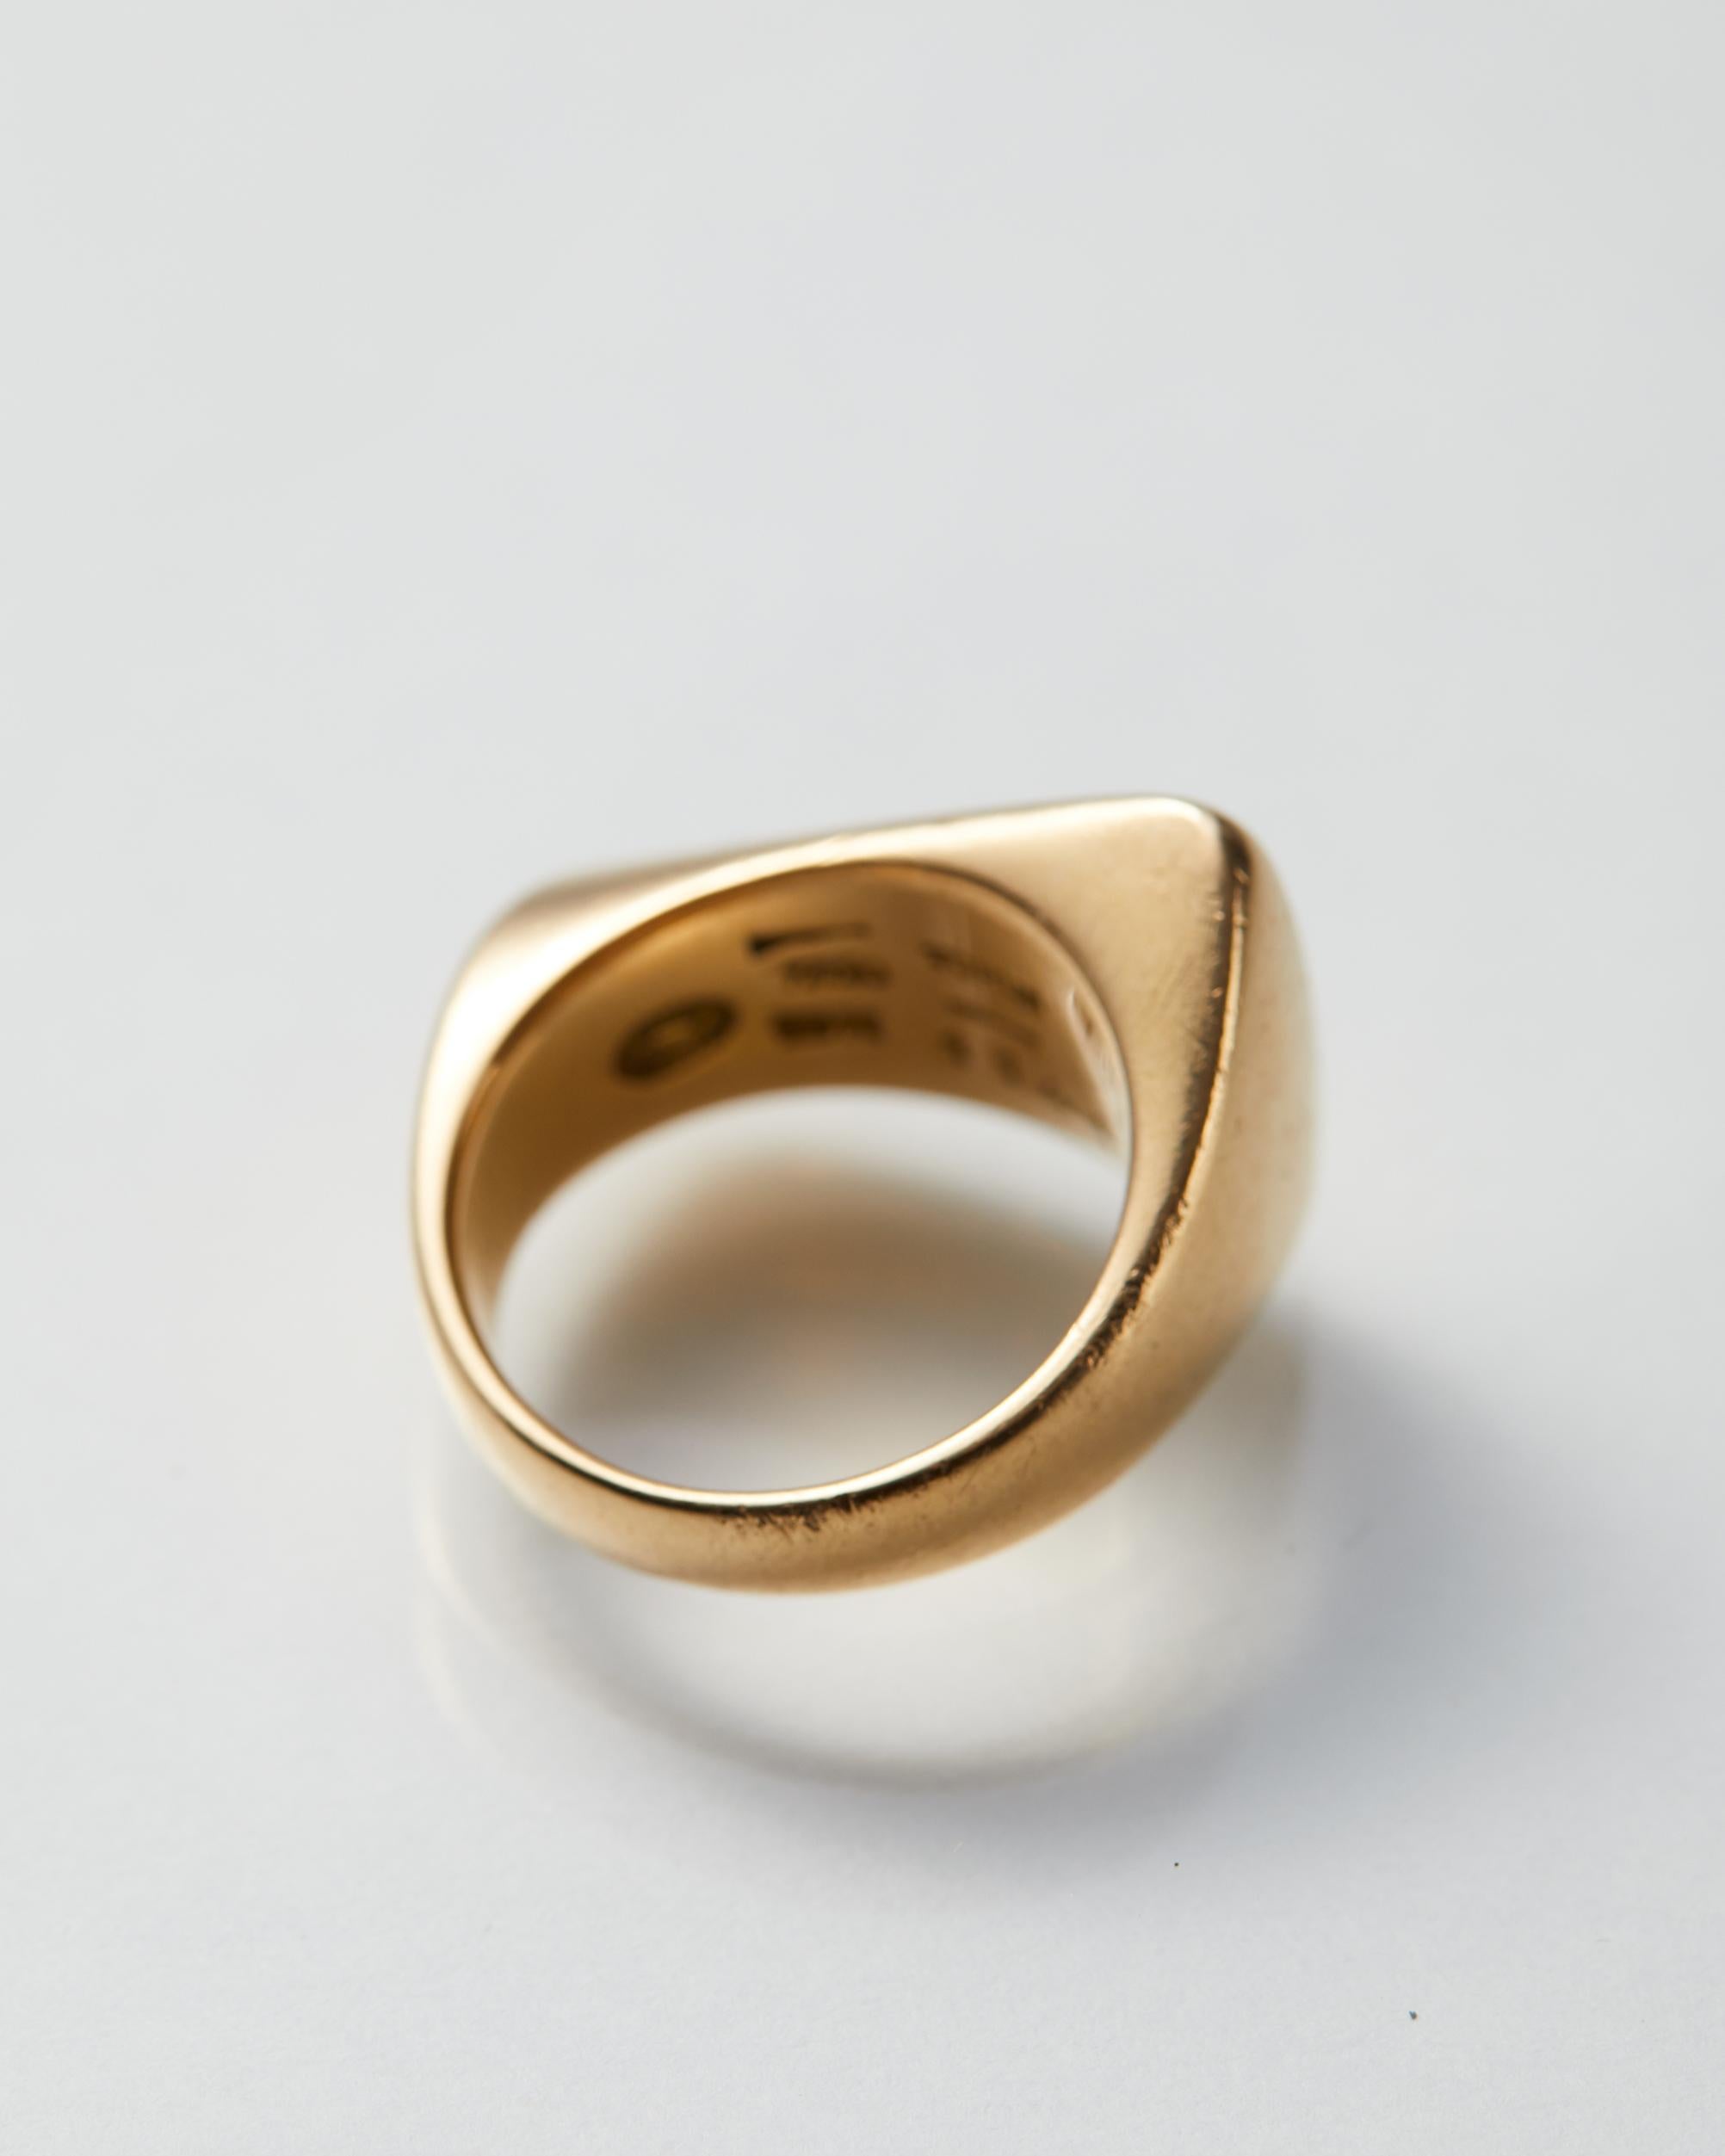 18K gold.

This ring was incorrectly stamped 